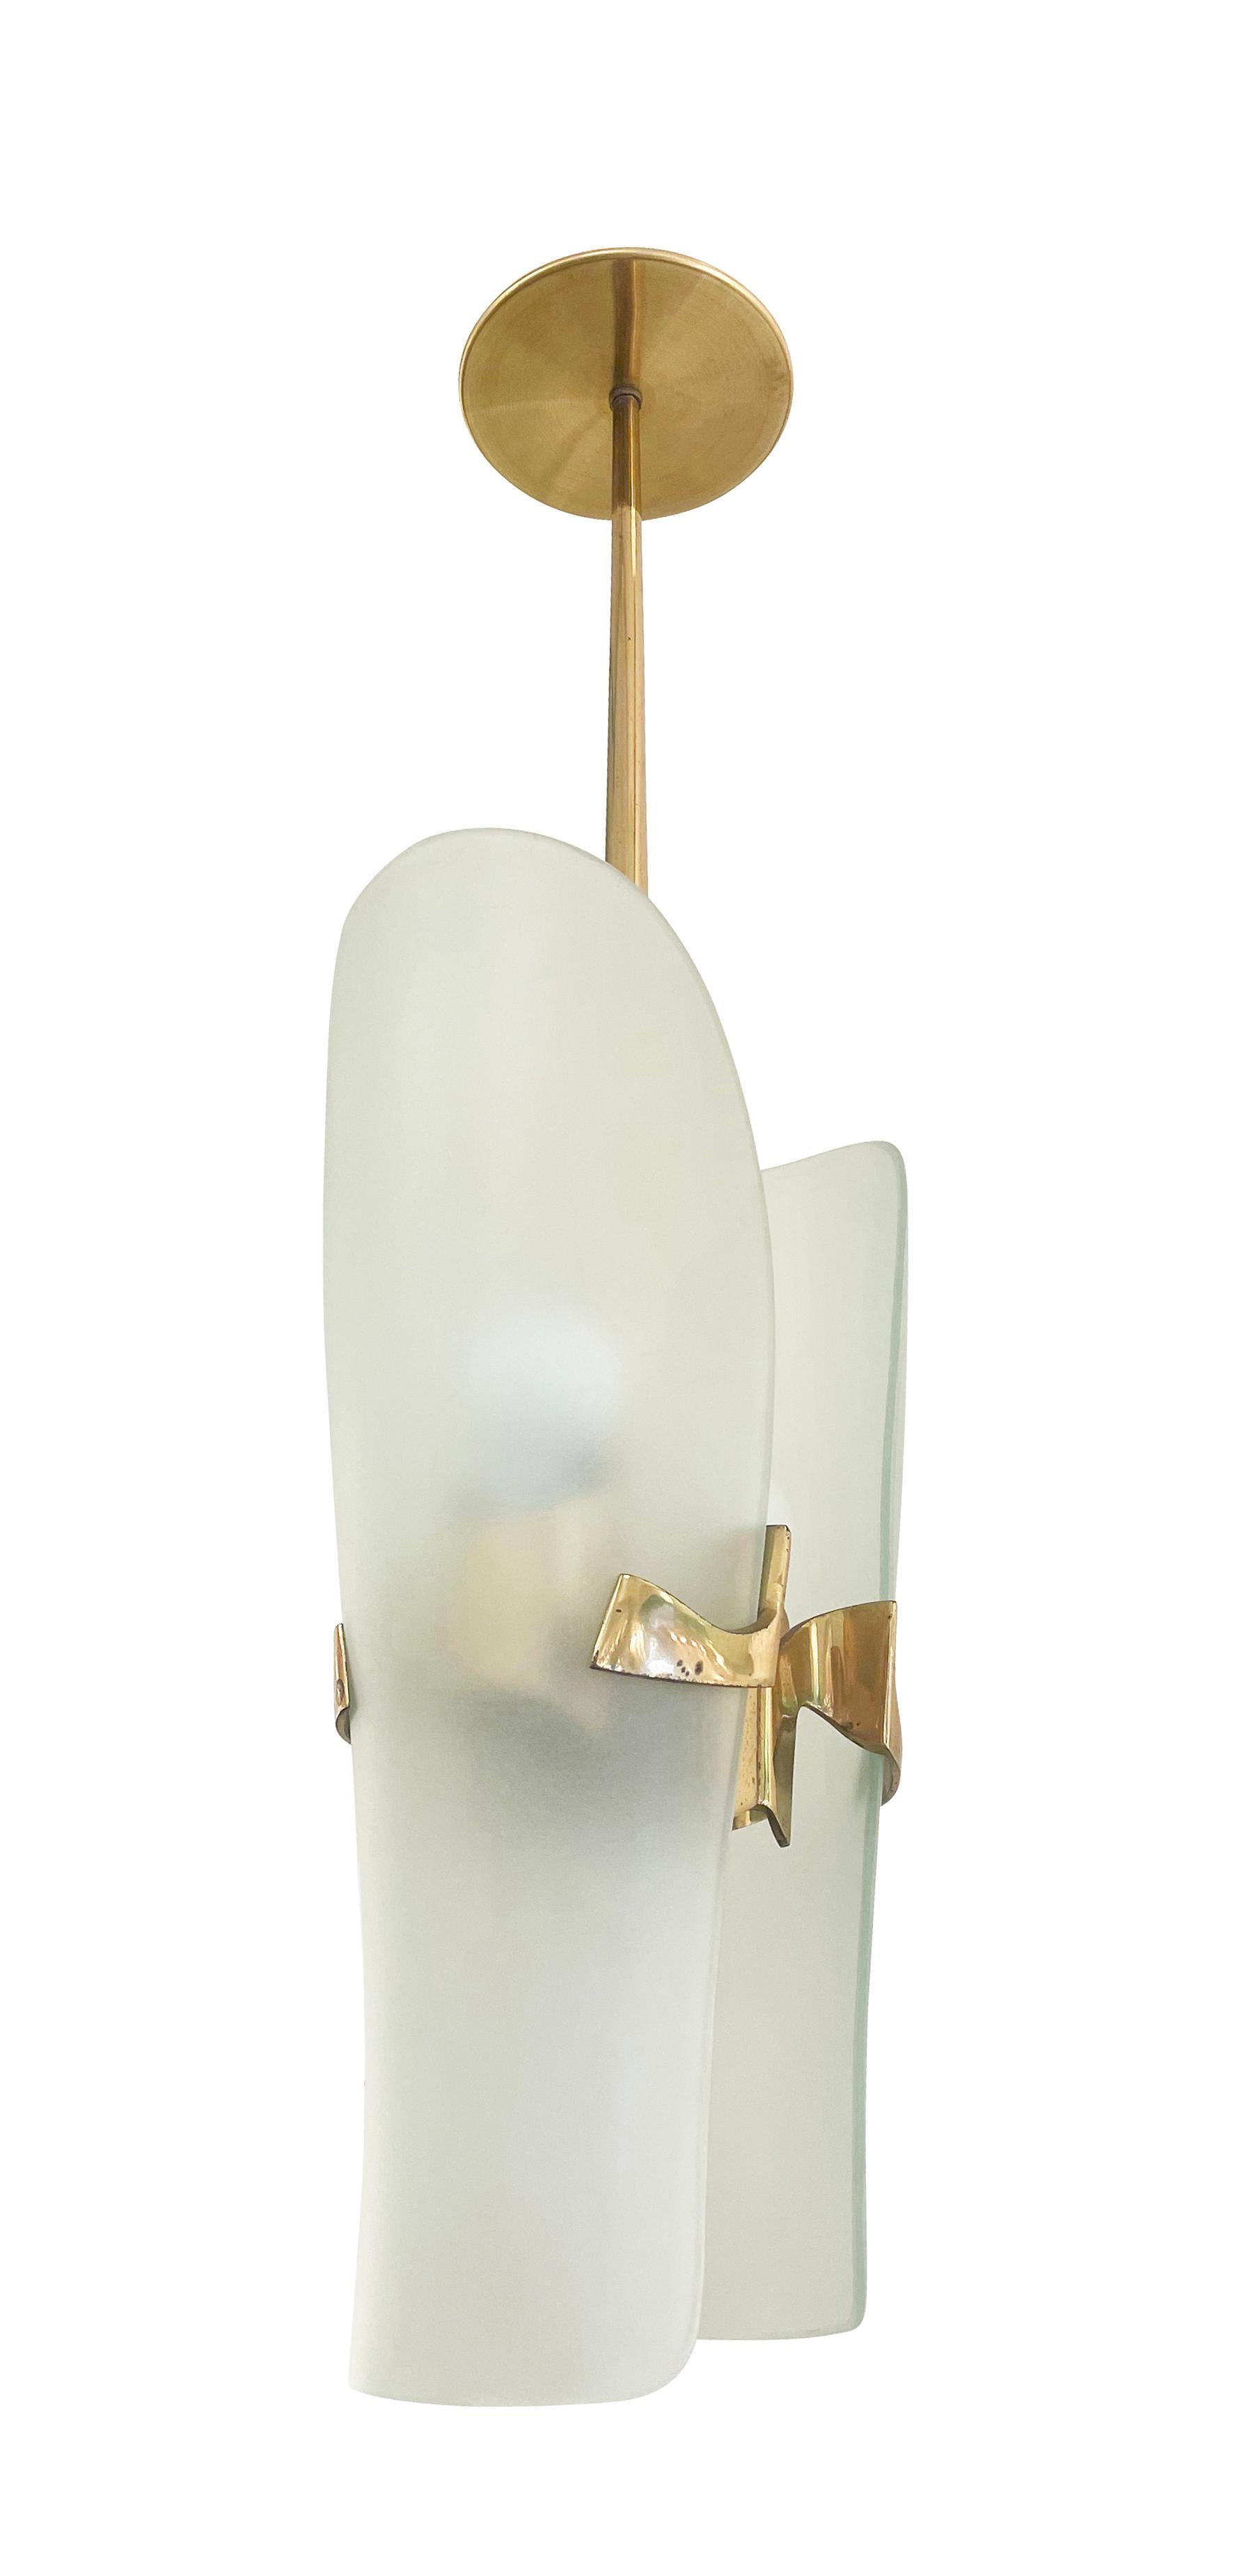 Fontana Arte Pendants, designed by Max Ingrand in the 1960s. Each frosted glass shade mounts on a cast brass bracket and covers an E26 bulb. 

Three available- price listed per pendant.

Condition: Excellent vintage condition, minor wear